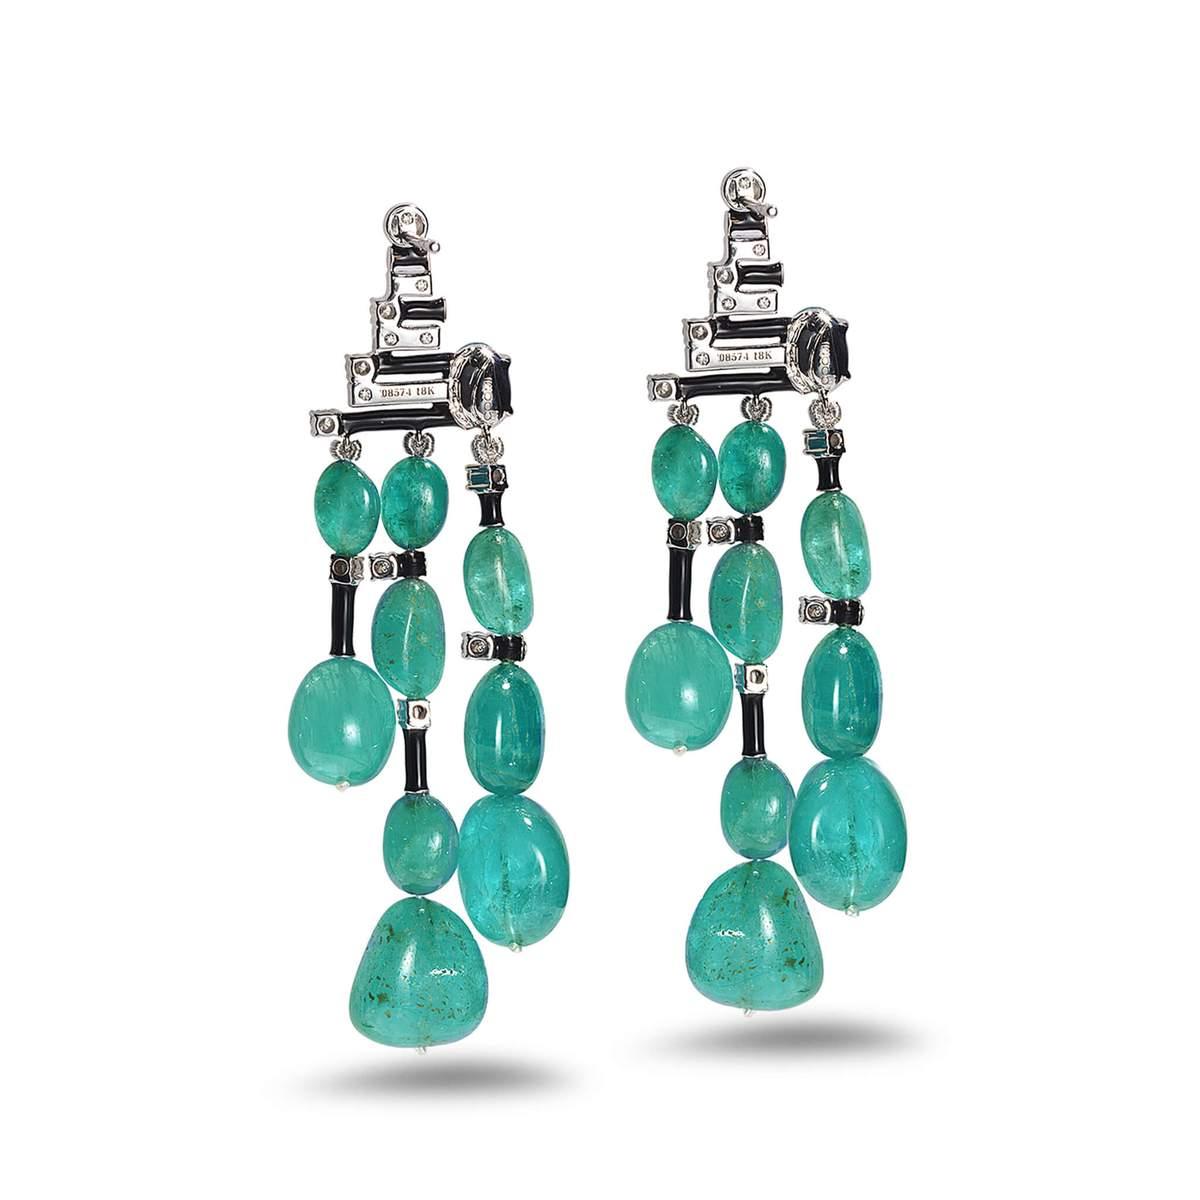 Coomi X Muzo collection Mystic Terrain earrings set in 18K white gold with 64.23cts Muzo Colombian emeralds, 1.08cts diamonds, and black enamel. One-of-a-kind.
